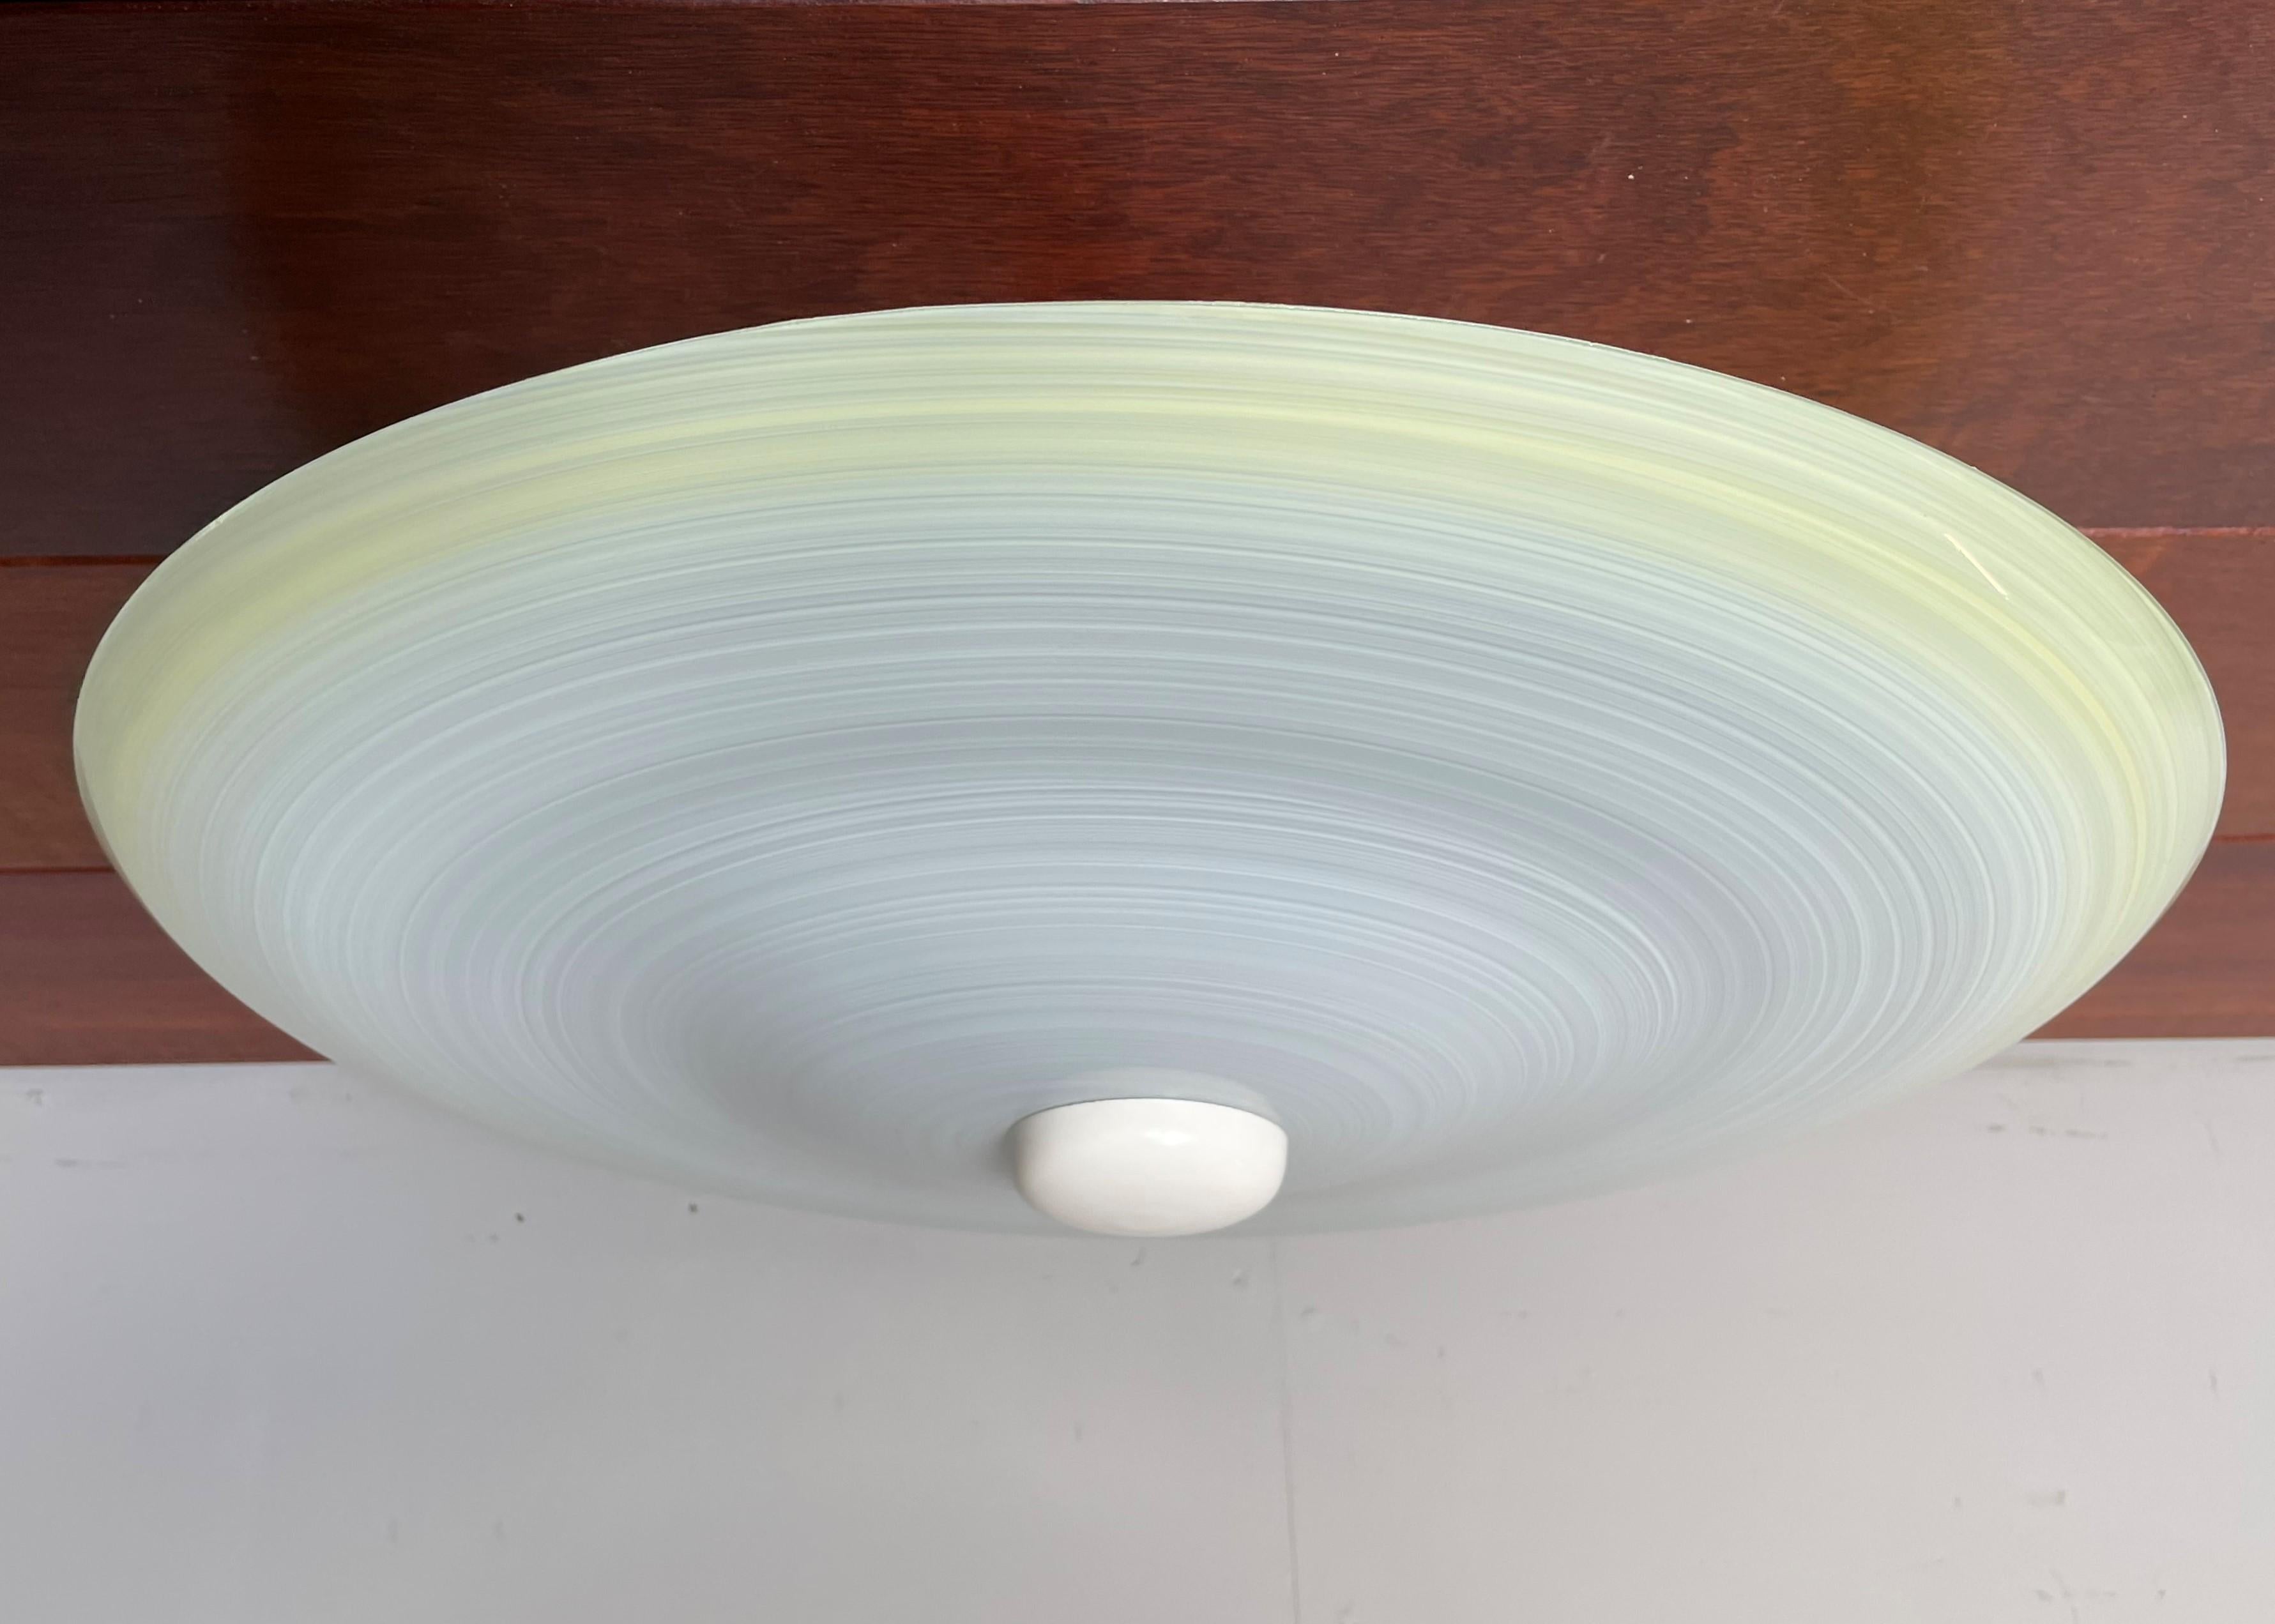 Very stylish Mid-Century Modern, 'swirling' circular pattern ceiling lamp.

This vintage light fixture has a beautiful look and feel and you will hardly ever find a light fixture from the Mid-Century Modern era with a more timeless glass shade.